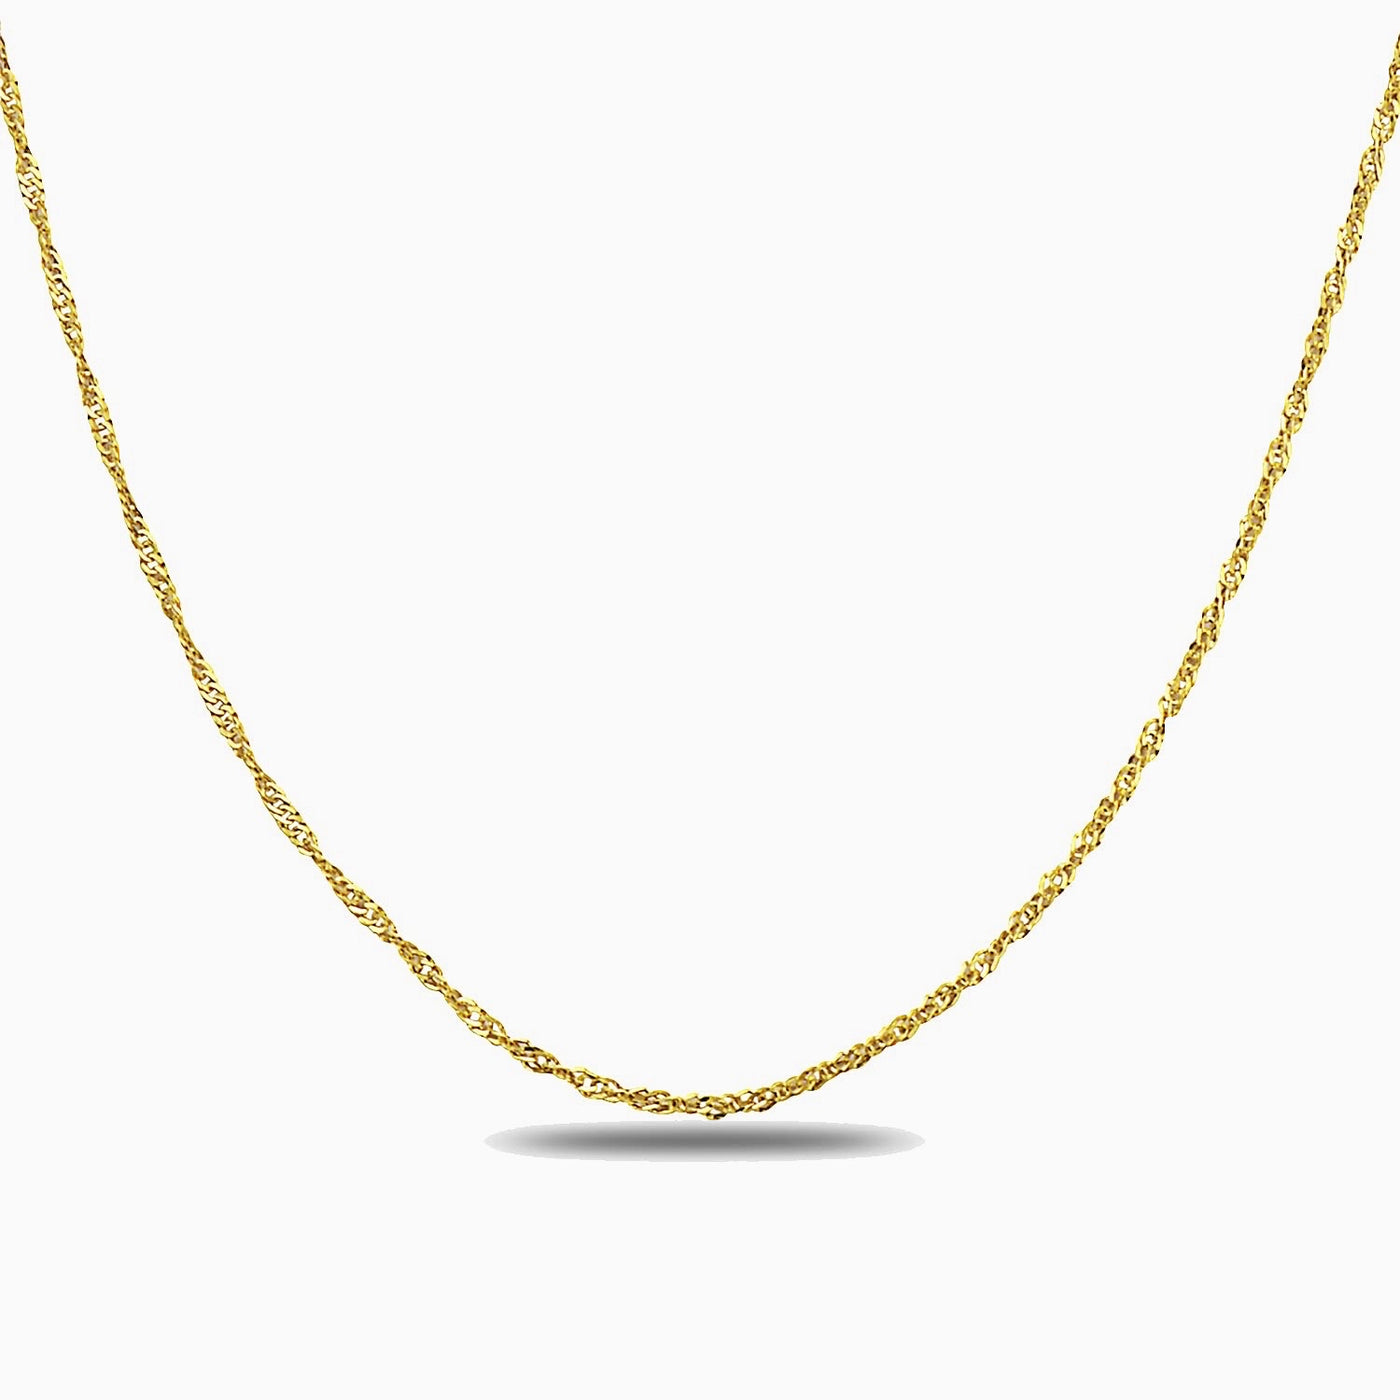 18K Gold 1.8MM Singapore Chain Necklace